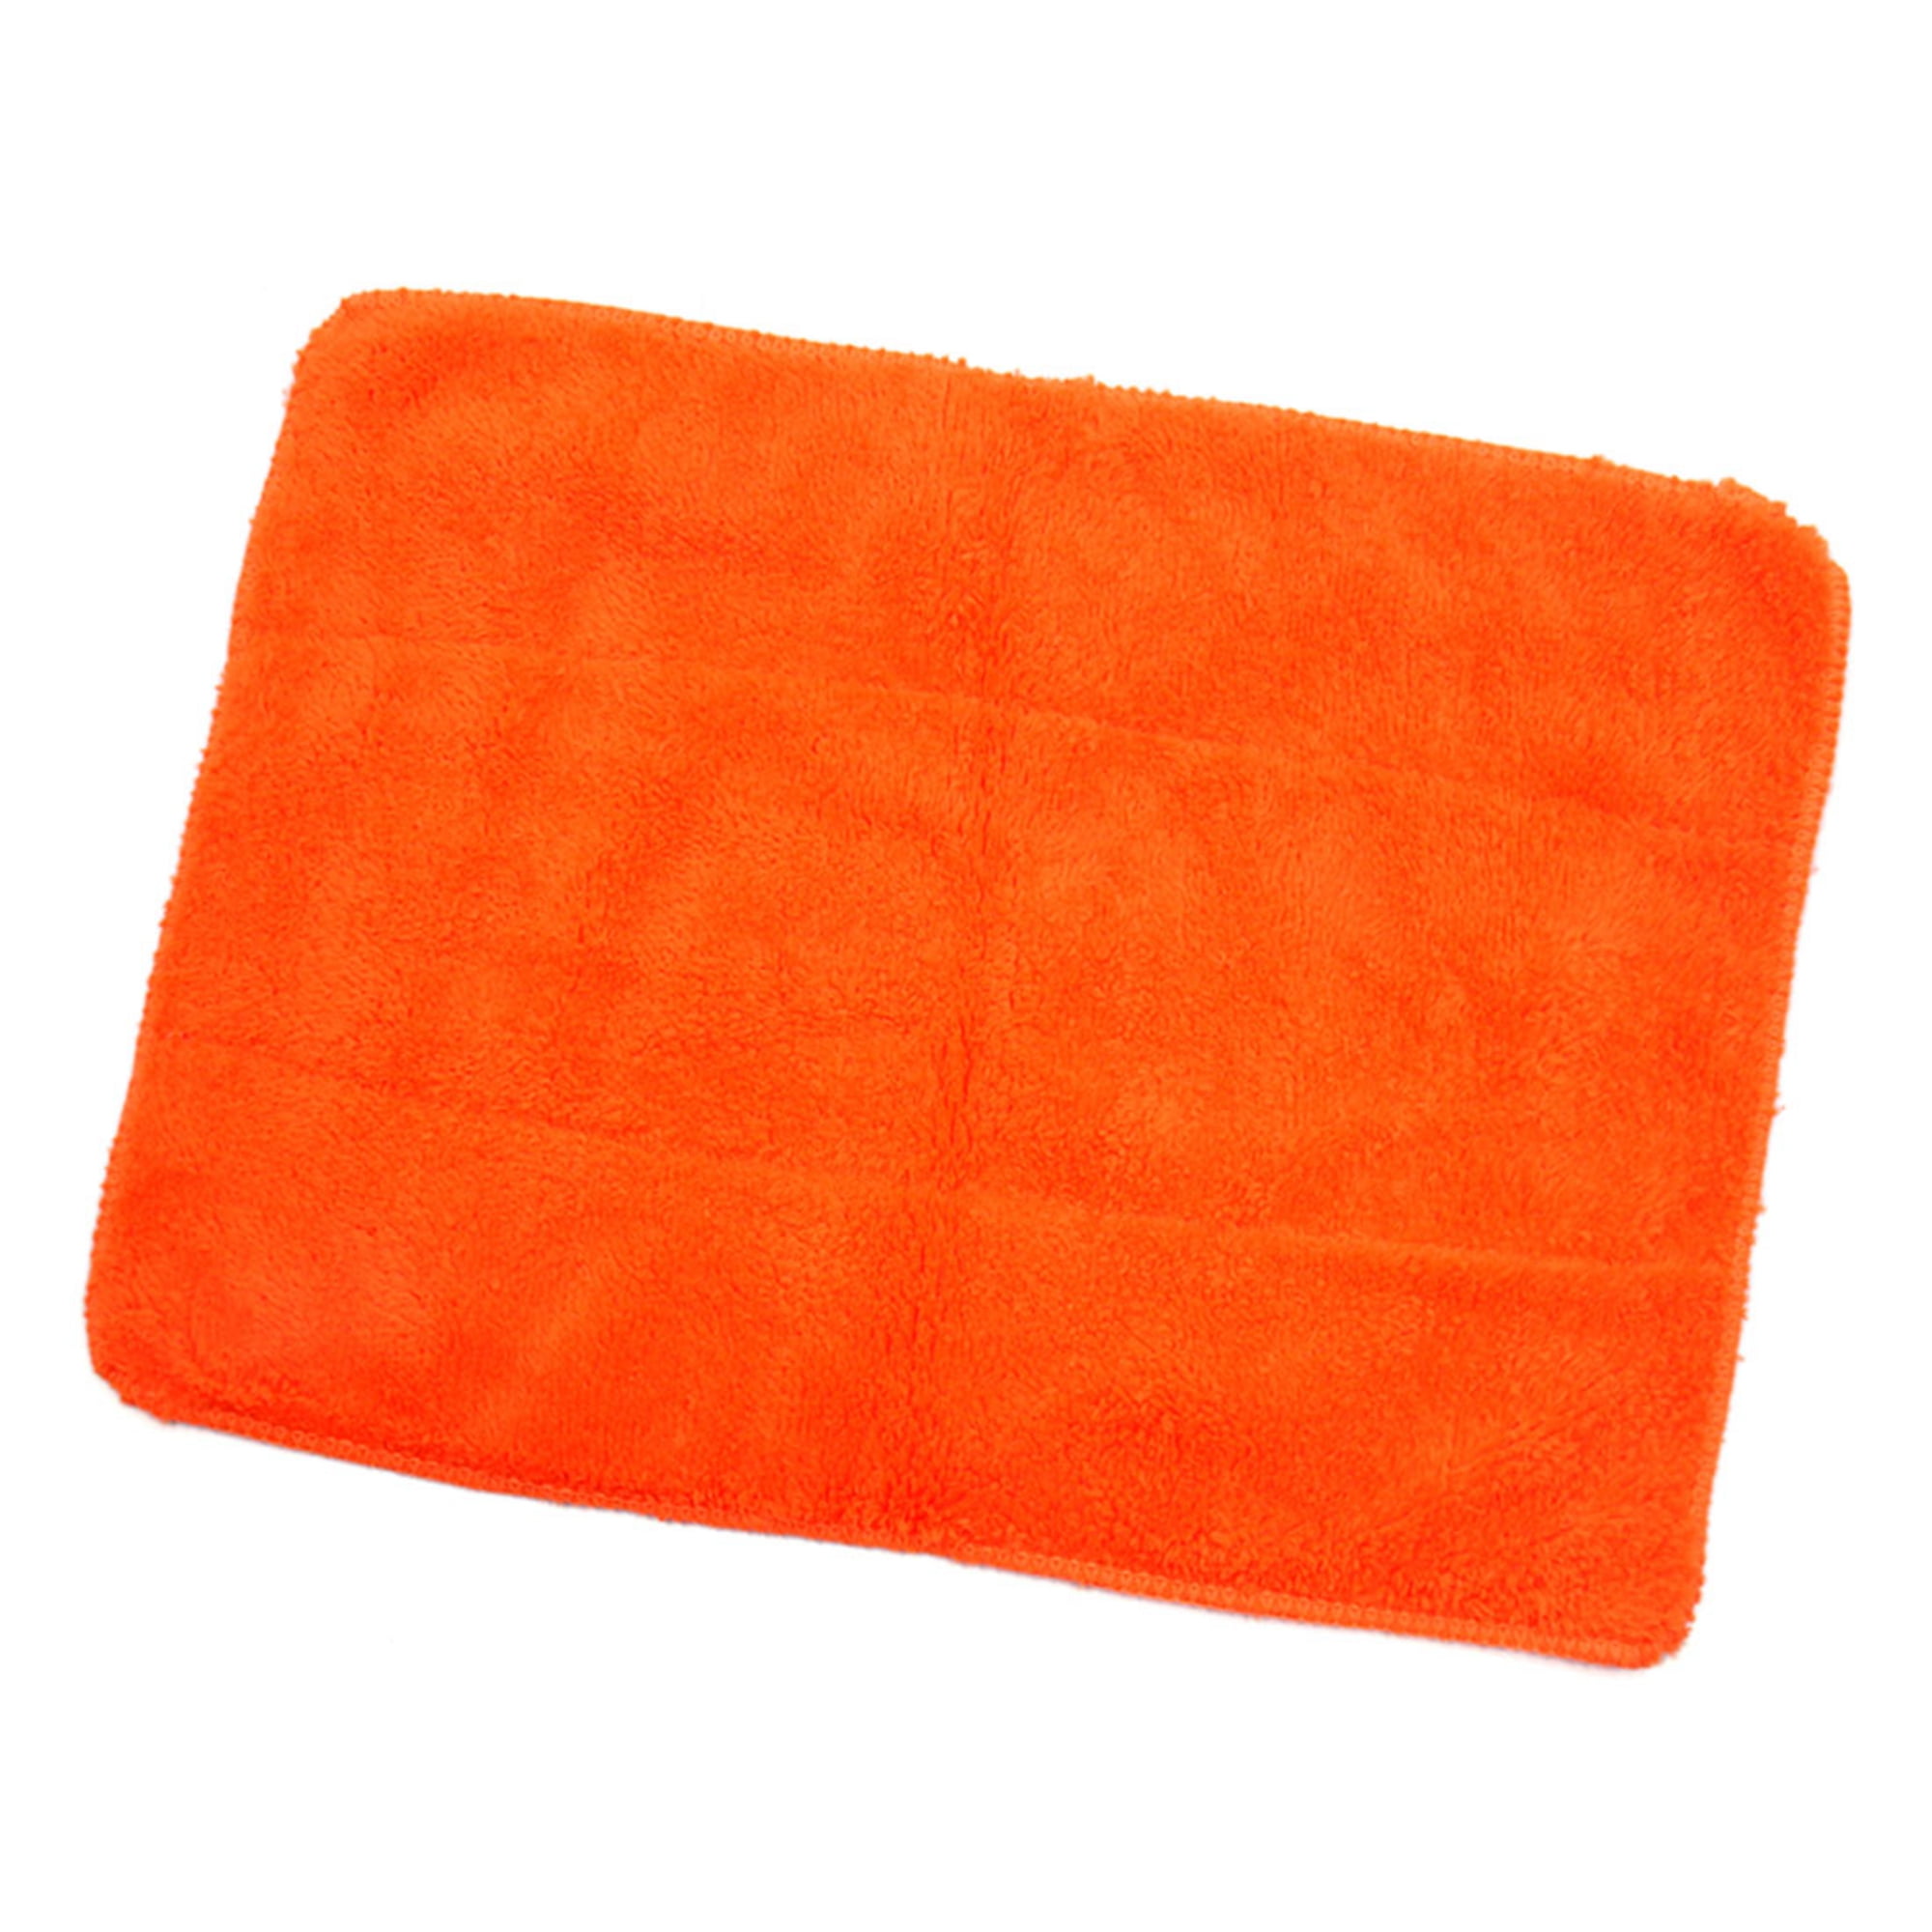 Towel Super Water Absorbent Microfiber Soft Car Wash Drying Cleaning Cloth Tool 